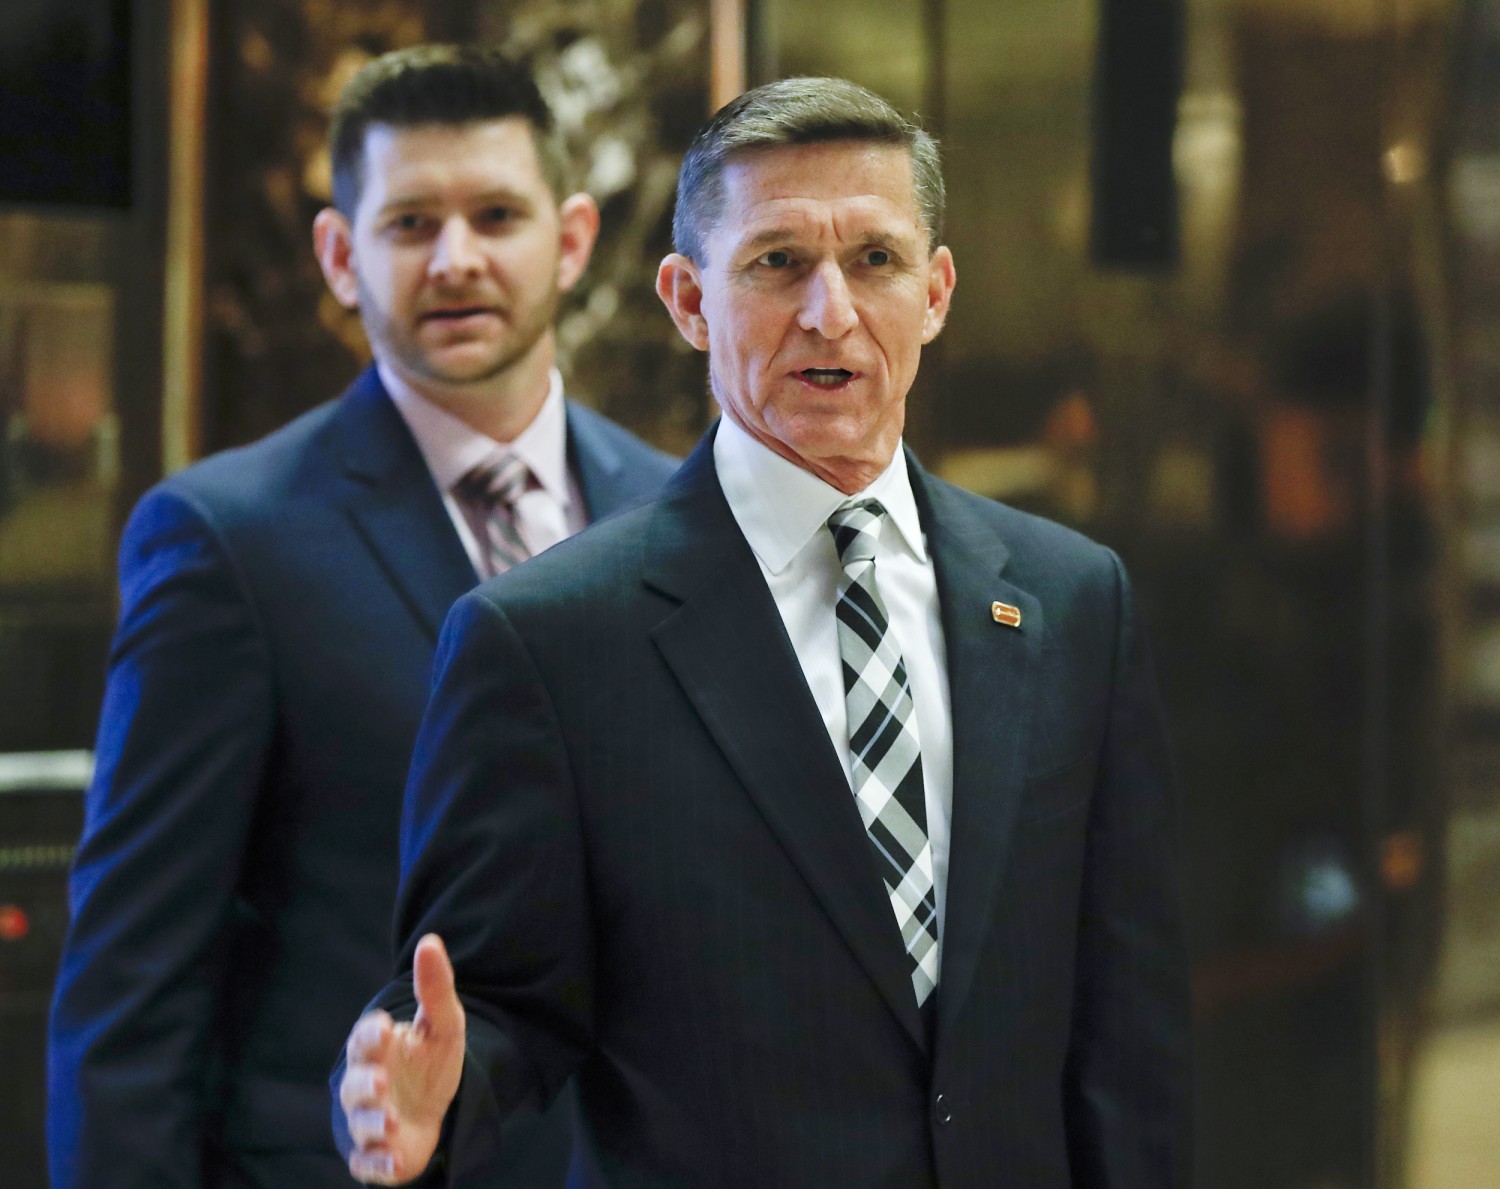 Mike Flynns Son Is Subject of Federal Russia Probe image